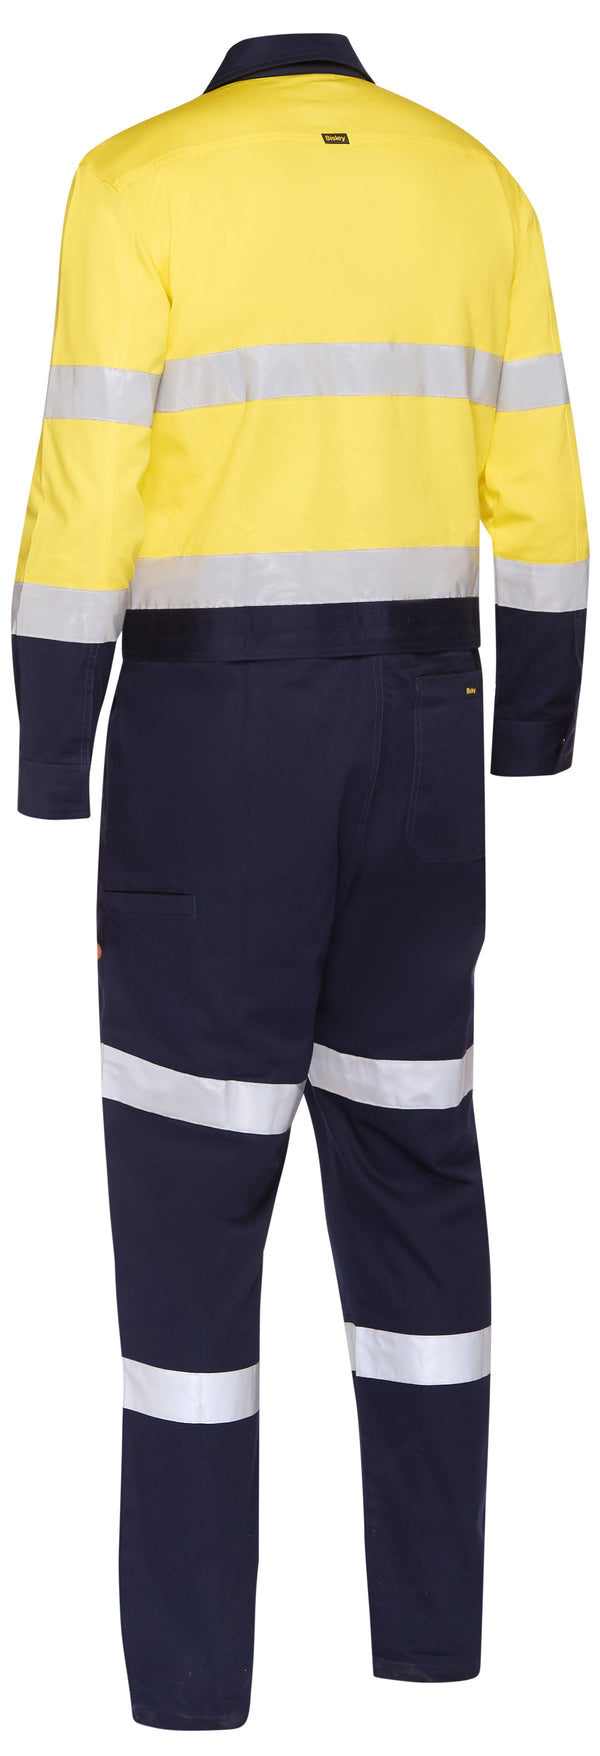 Taped Hi-Vis Work Coverall With Waist Zip Opening (Regular)